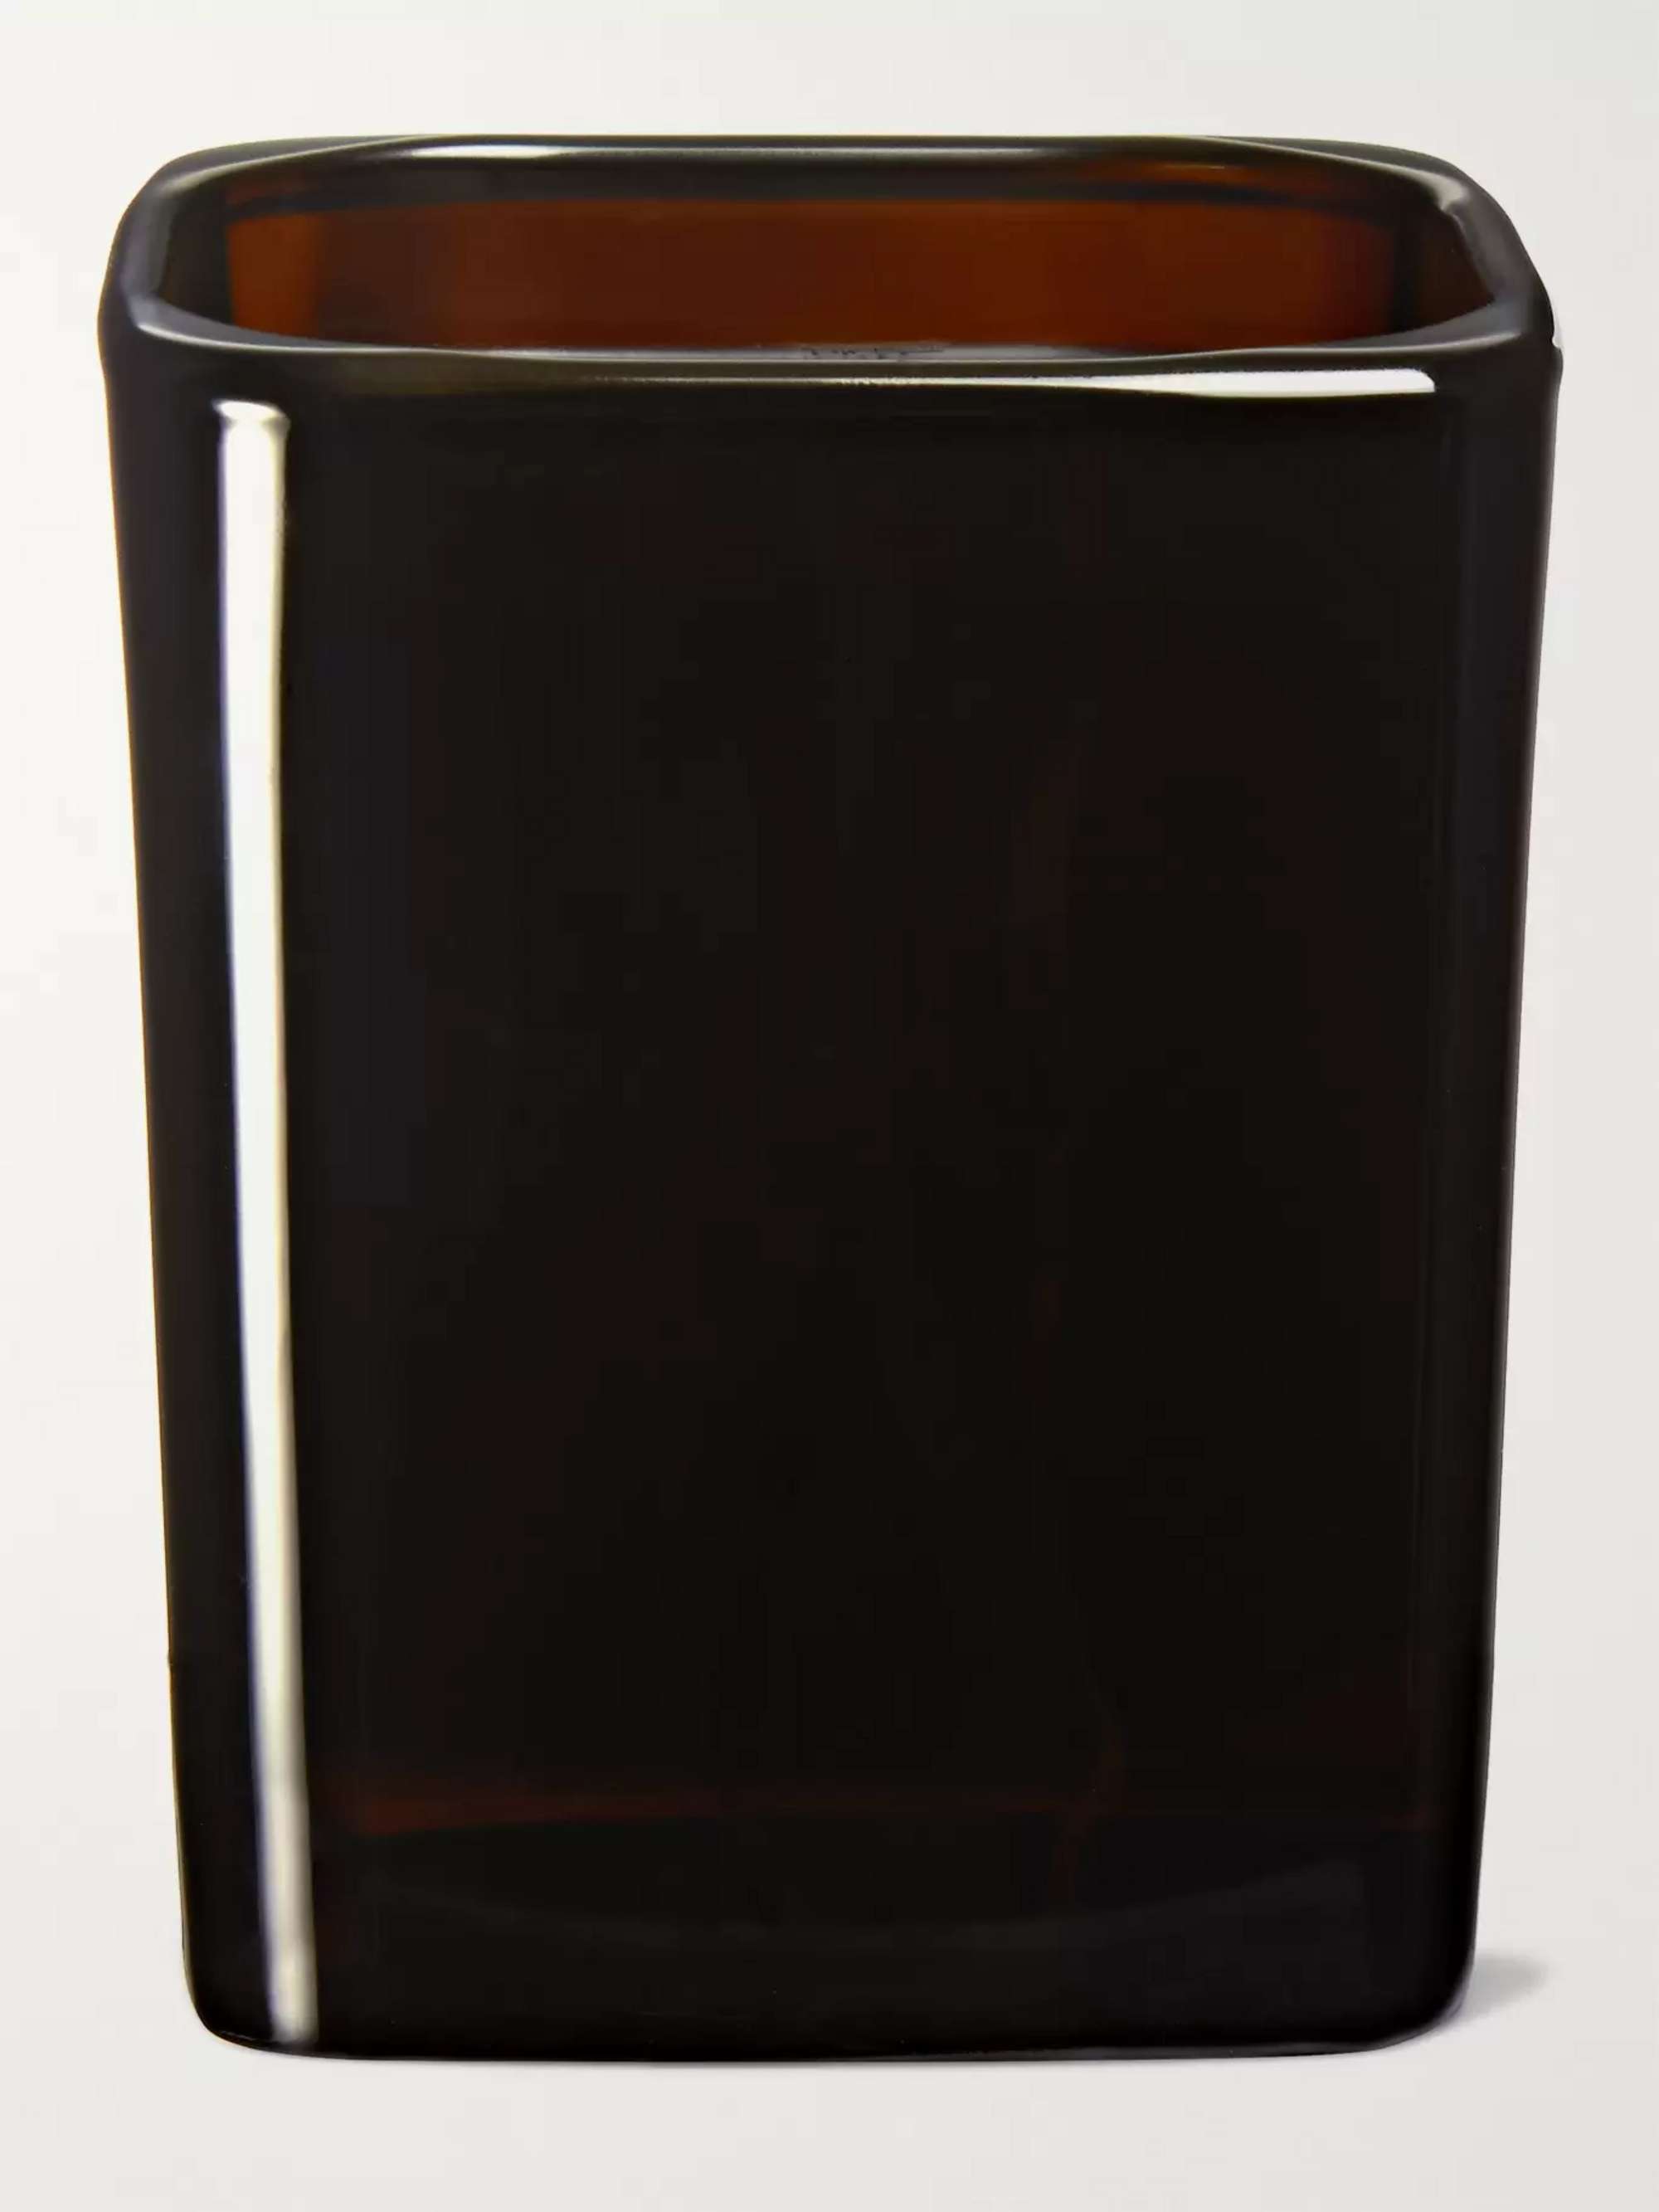 TOM FORD BEAUTY Oud Wood Scented Candle, 200g